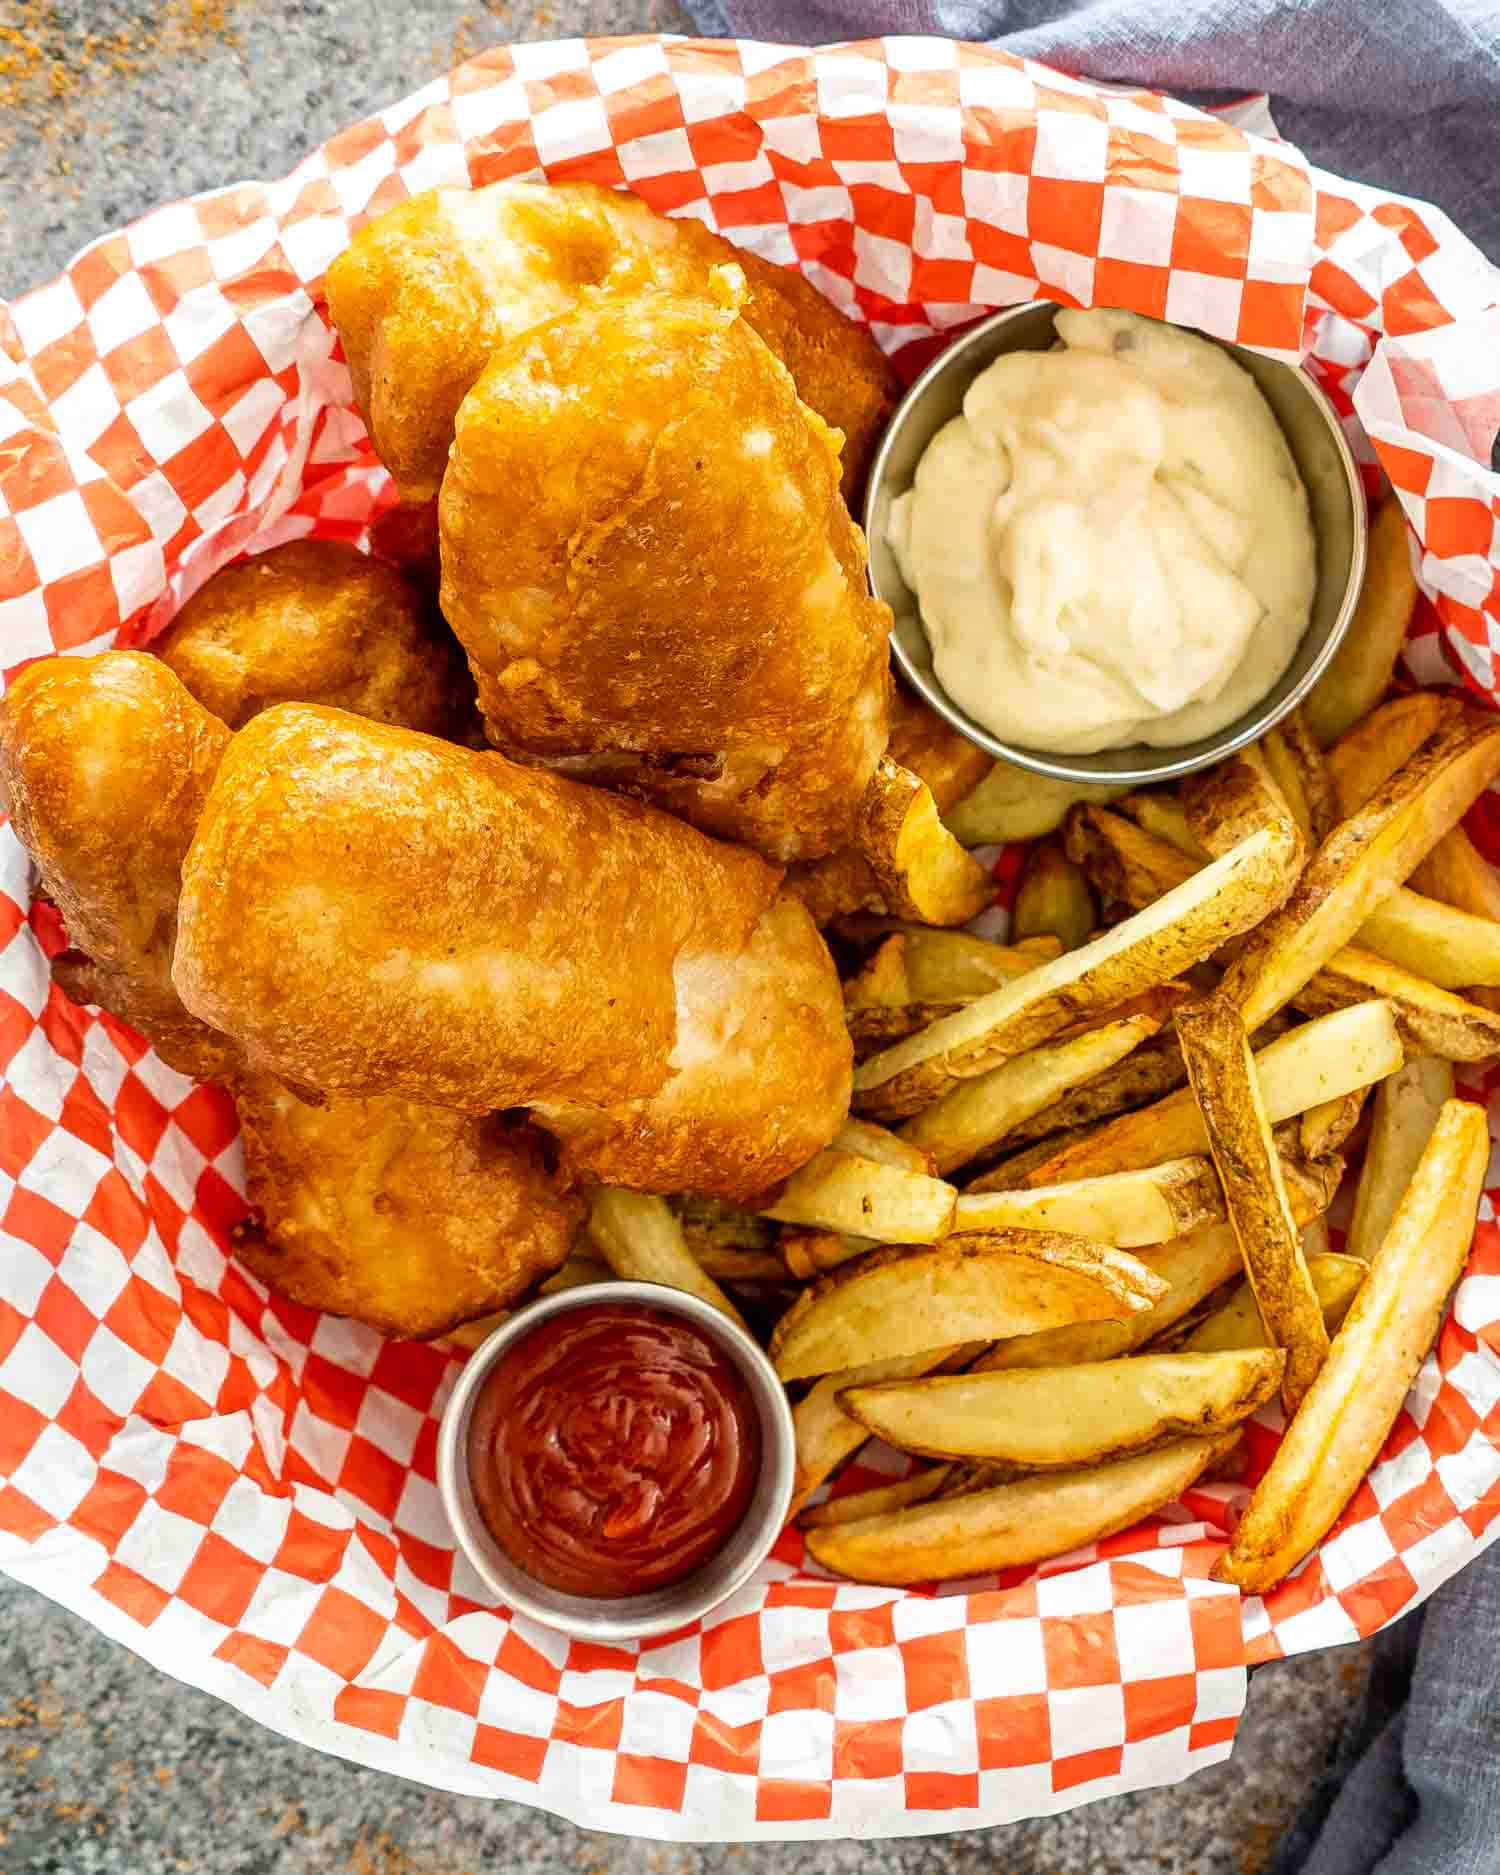 fish and chips in a basket with tartar sauce and ketchup.